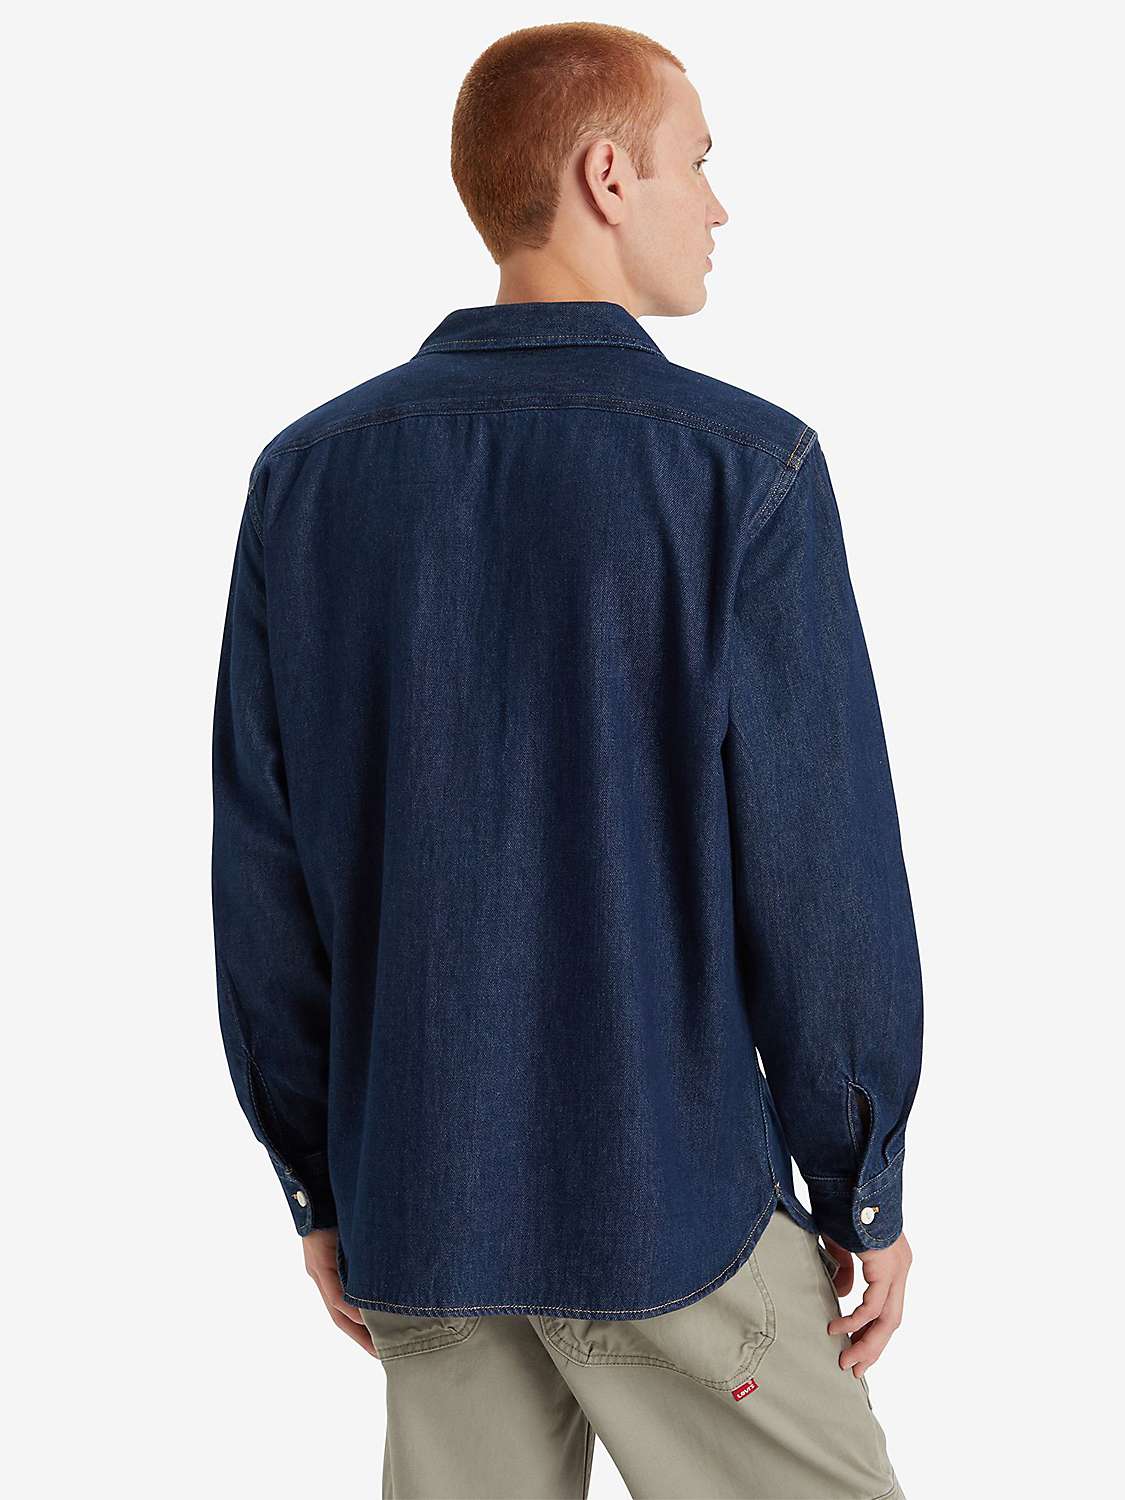 Buy Levi's Classic Worker Shirt, Blue Online at johnlewis.com